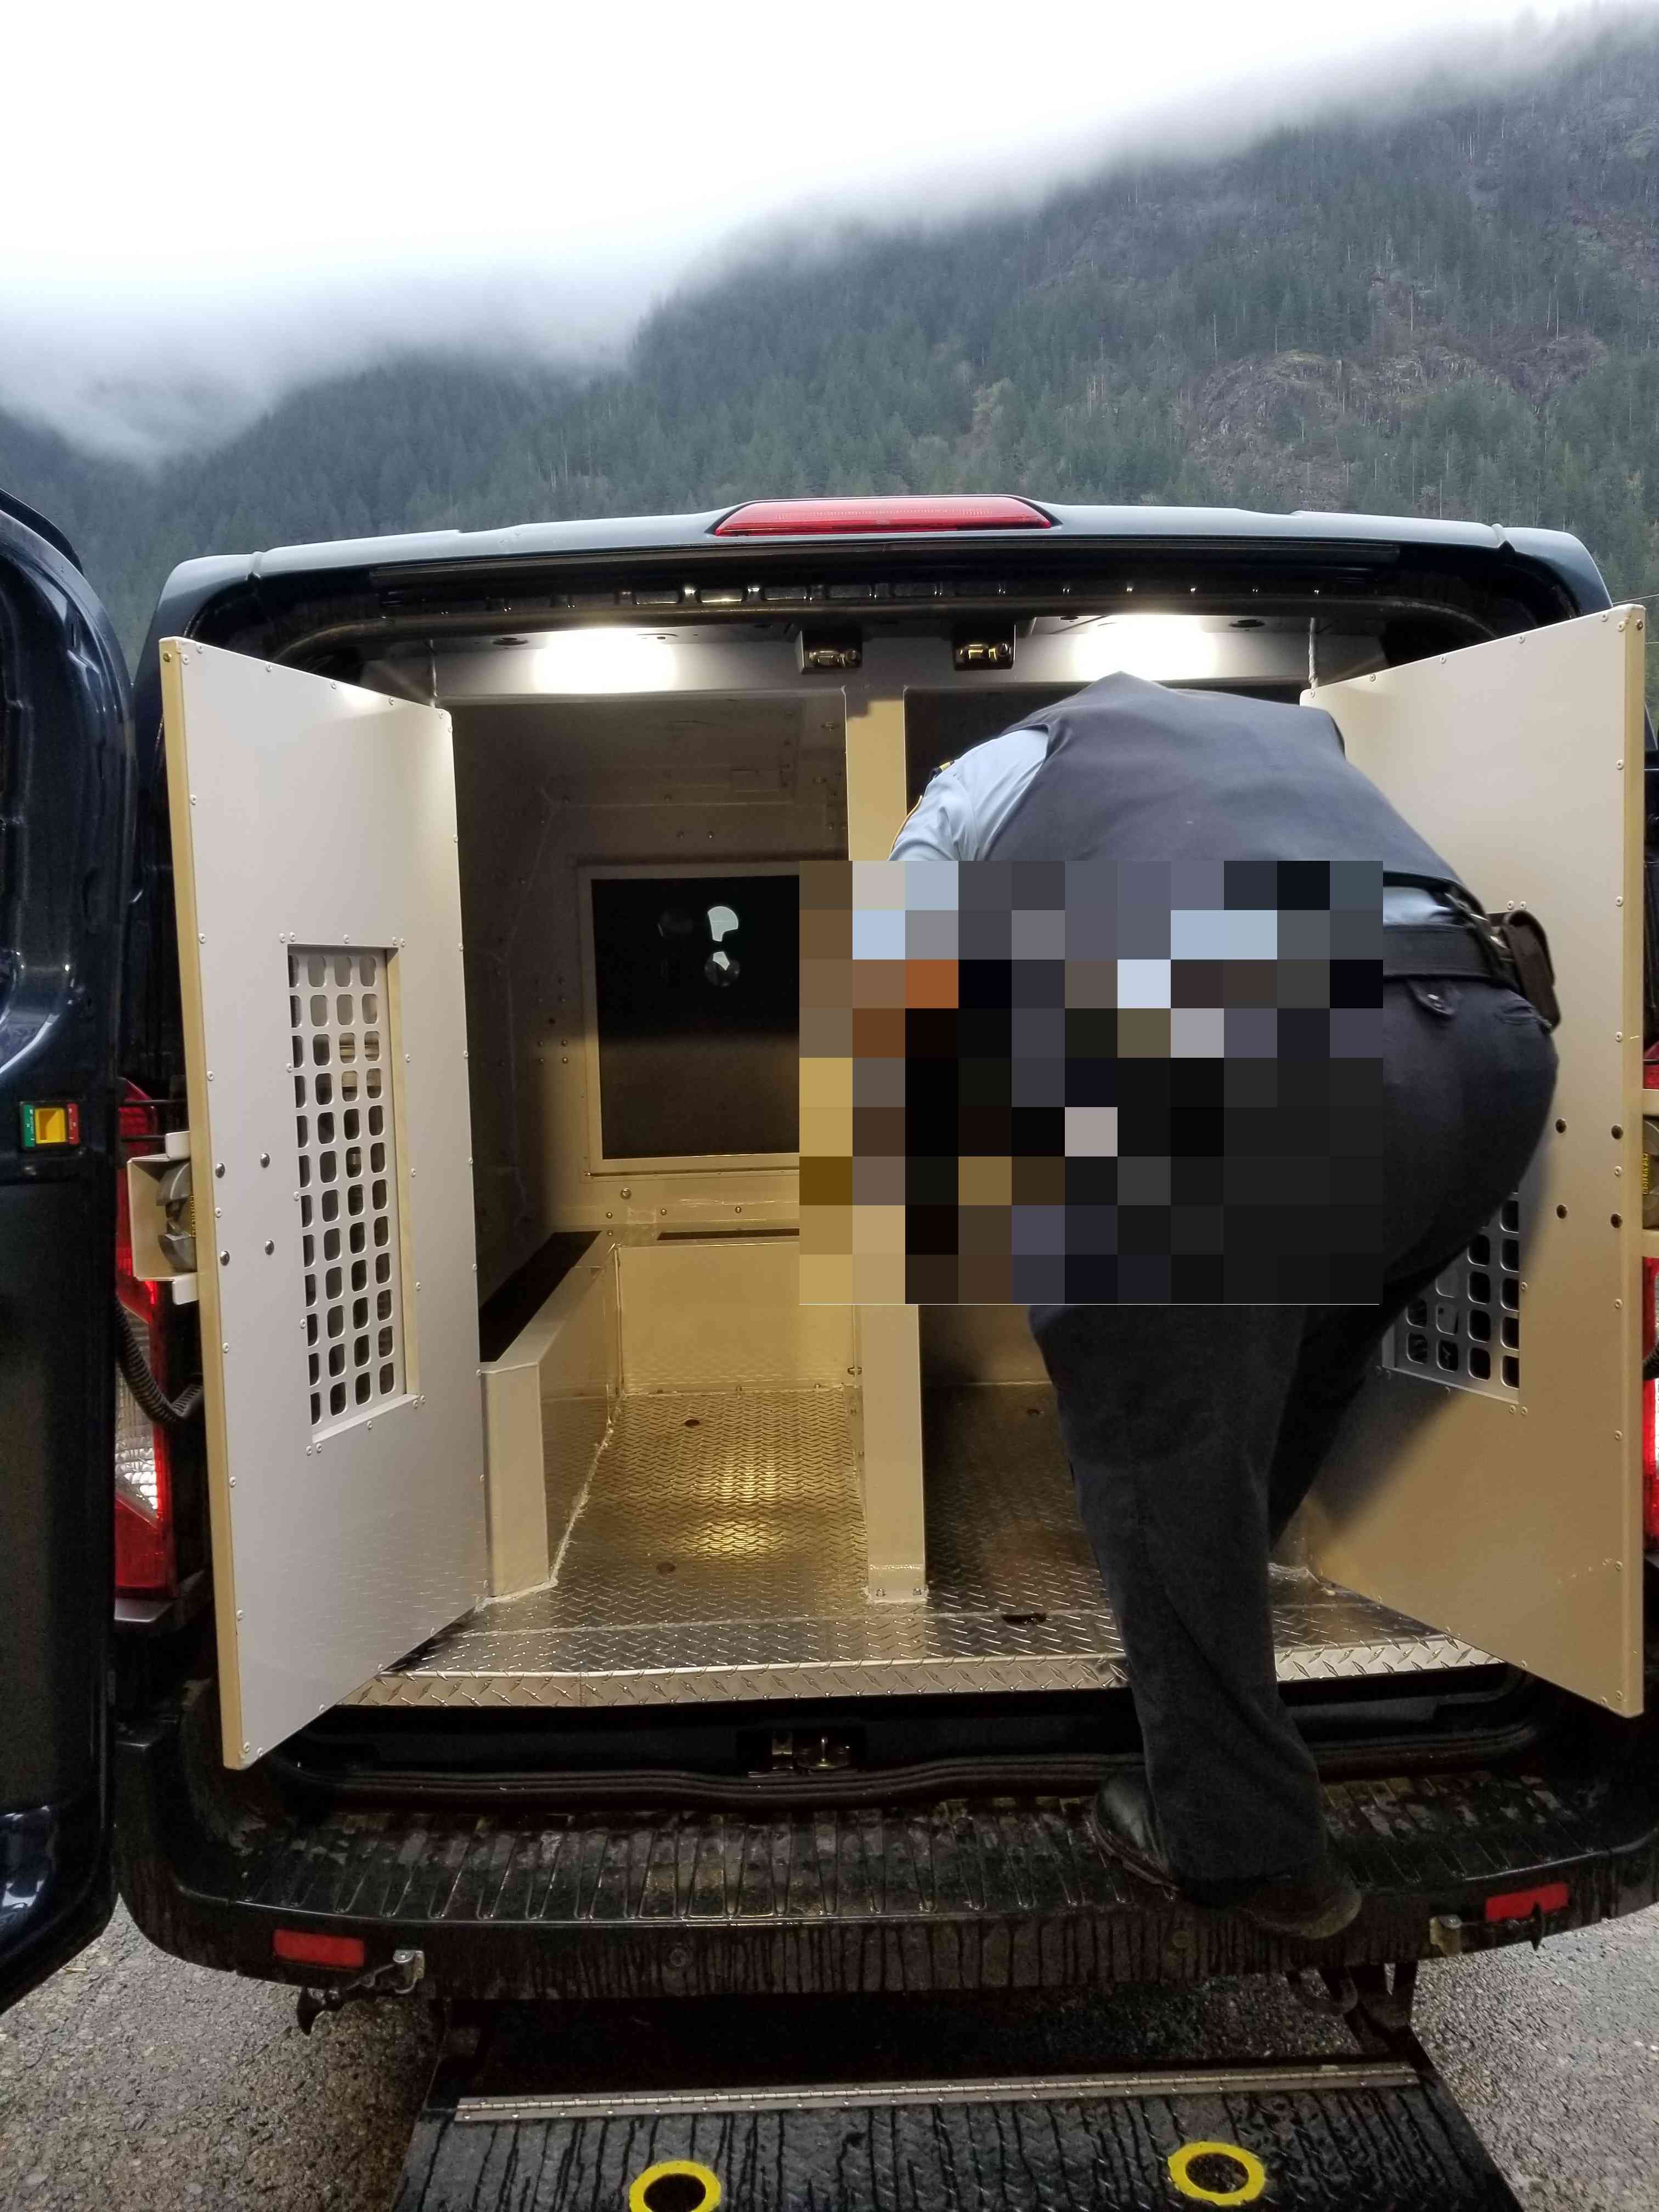 Rear view of a CSC prisoner transport vehicle with a correctional officer climbing into the prisoner compartment.